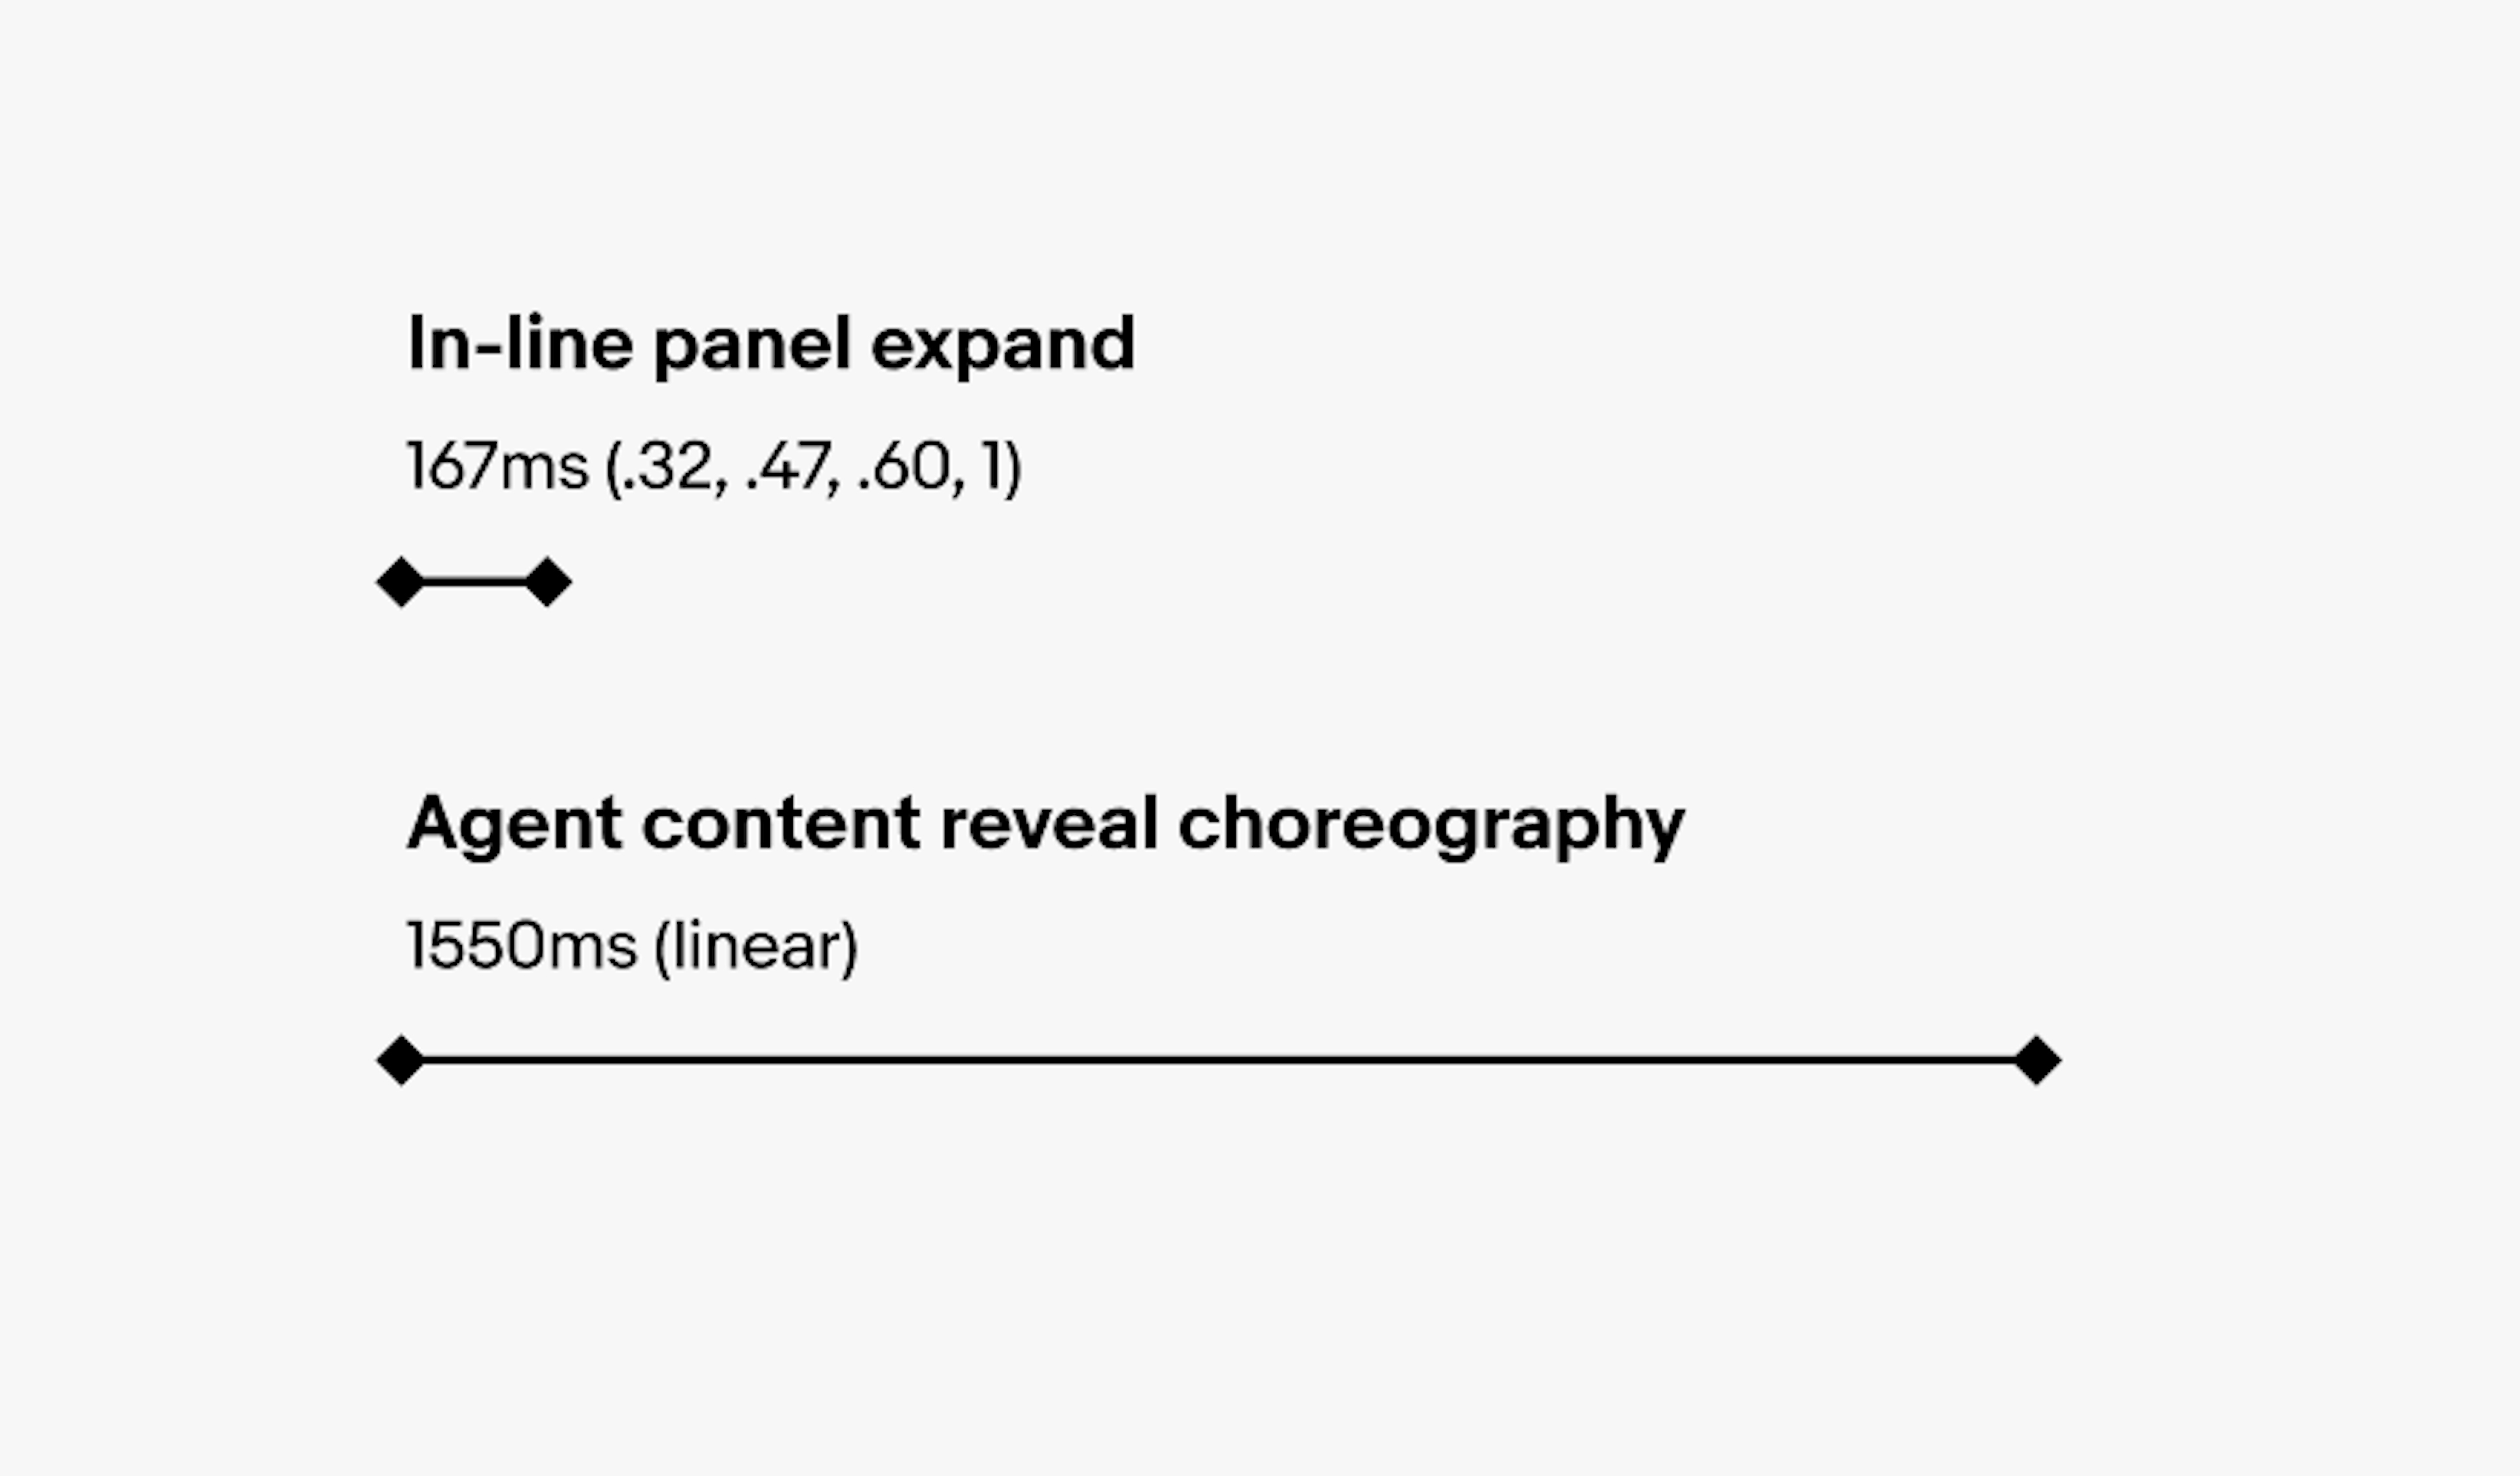 Two motion timeline graphics. The first is for in-line panel expand 167ms (.32, .47, .60, 1.00). The second is for agent content reveal choreography 1550ms (linear).